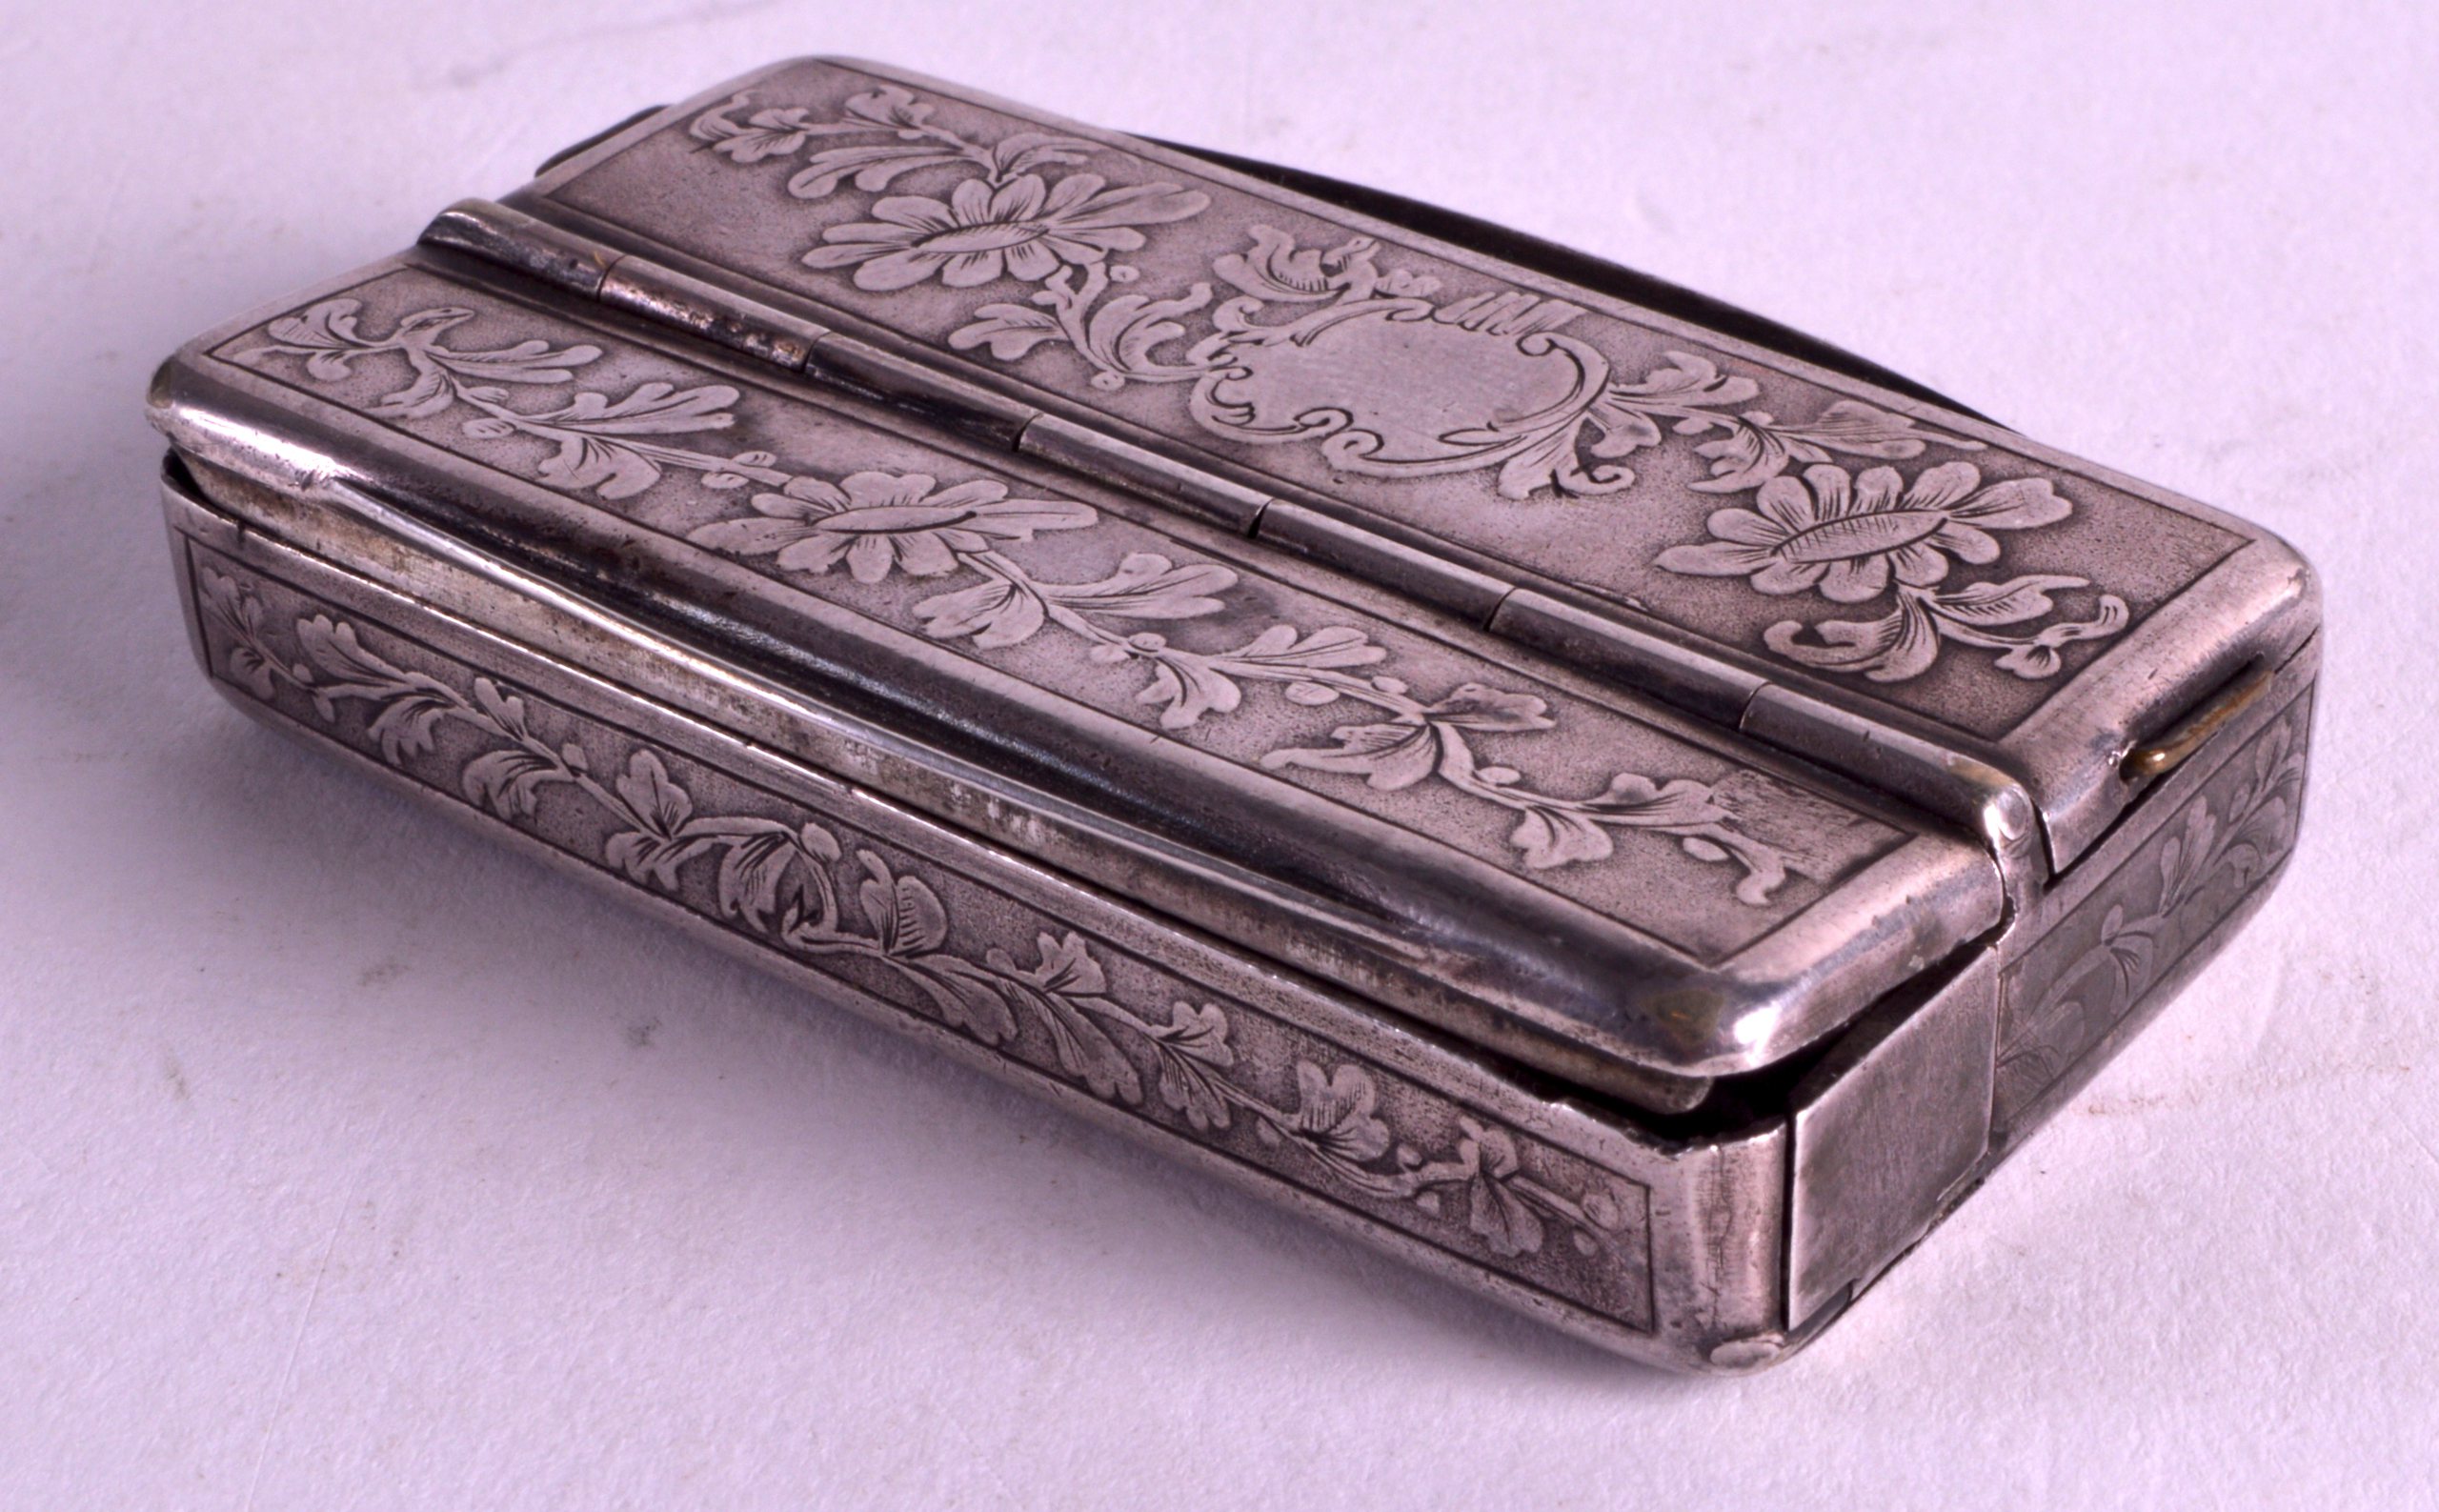 A VERY RARE 19TH CENTURY FRENCH SILVER SNUFF BOX with unusual Vesta feature & folding candle. 2.5ins